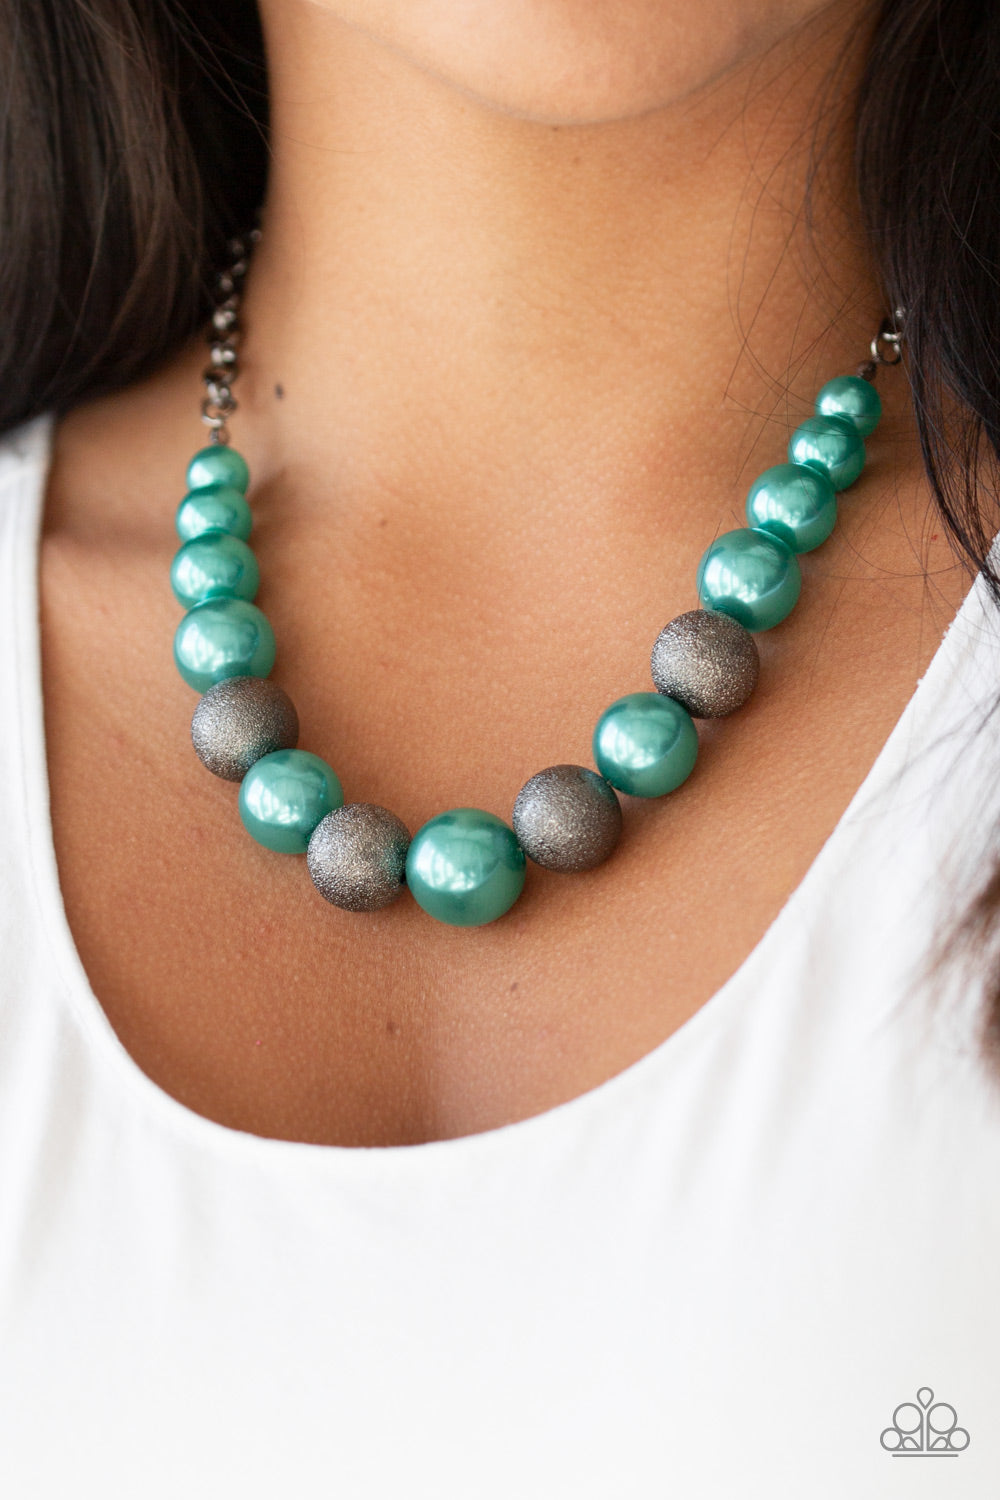 Color Me CEO - Green Necklace - Shine With Aloha, LLC